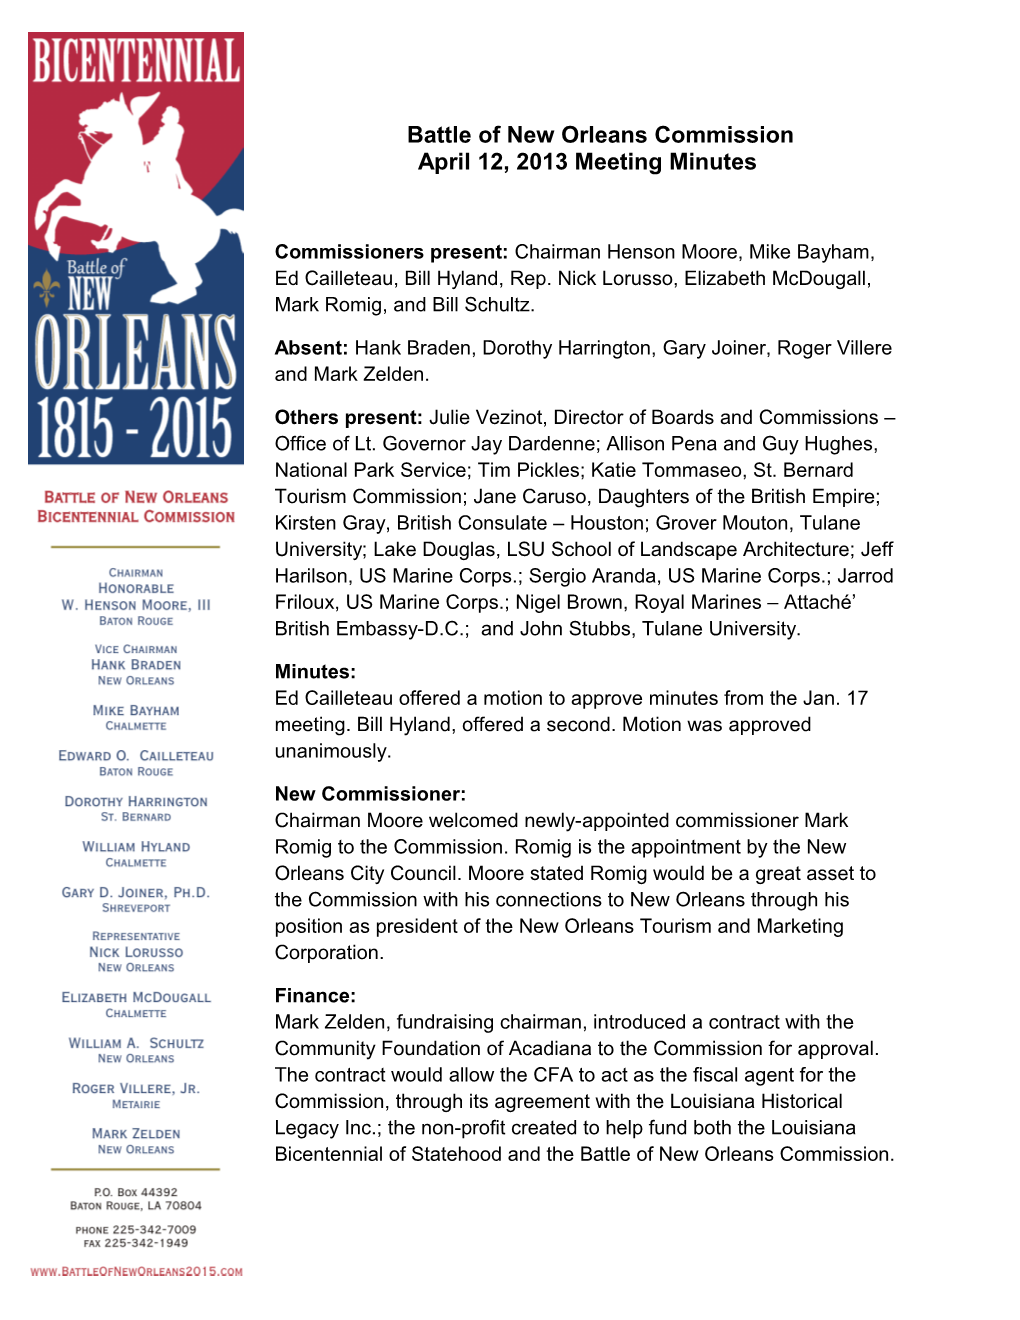 Battle of New Orleans Commission April 12, 2013 Meeting Minutes